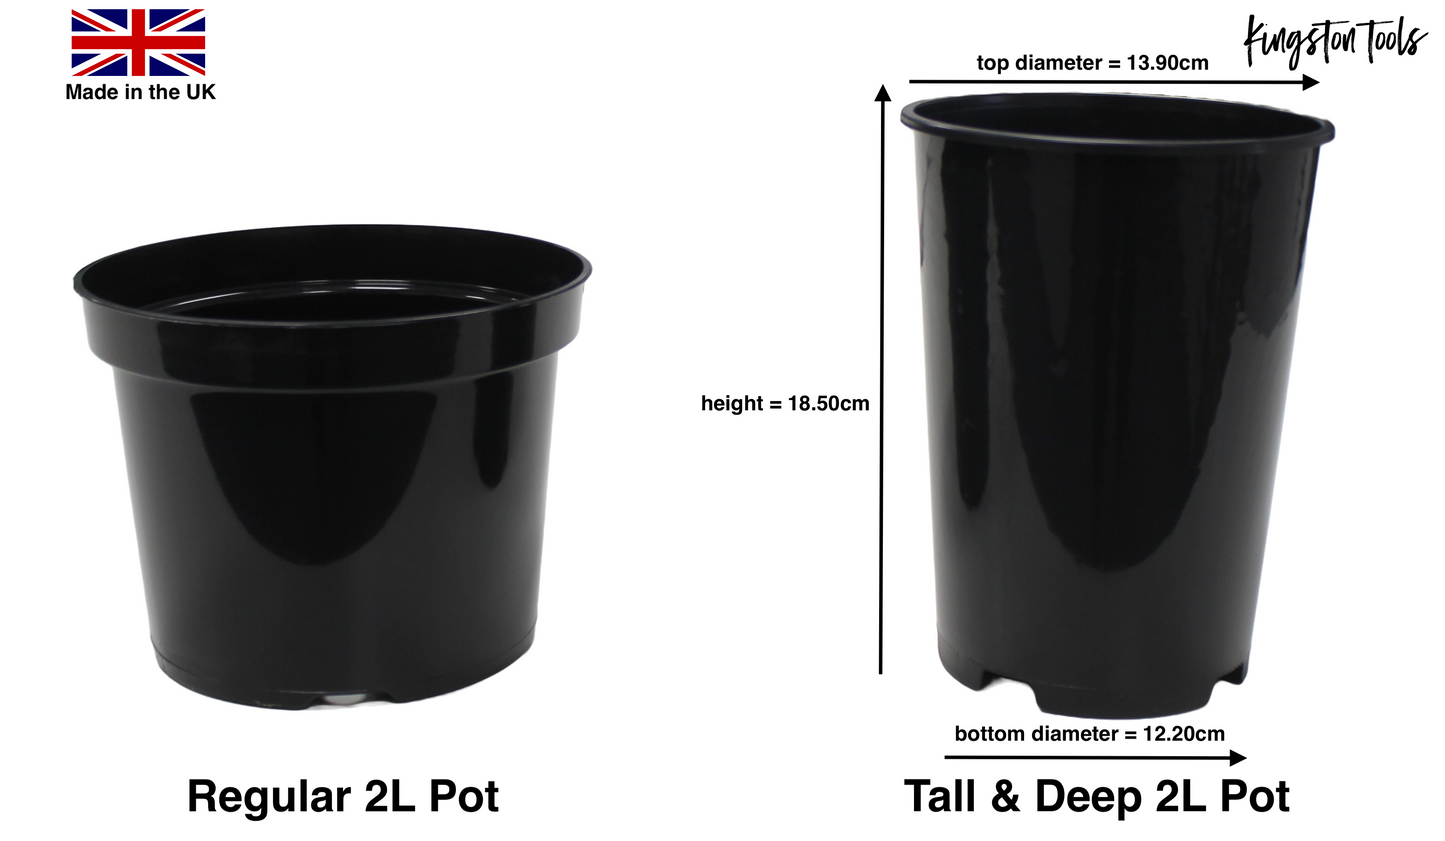 Kingston Tools 10x Extra Tall & Deep Premium Black Plant Pots Recycled Plastics Made in the UK